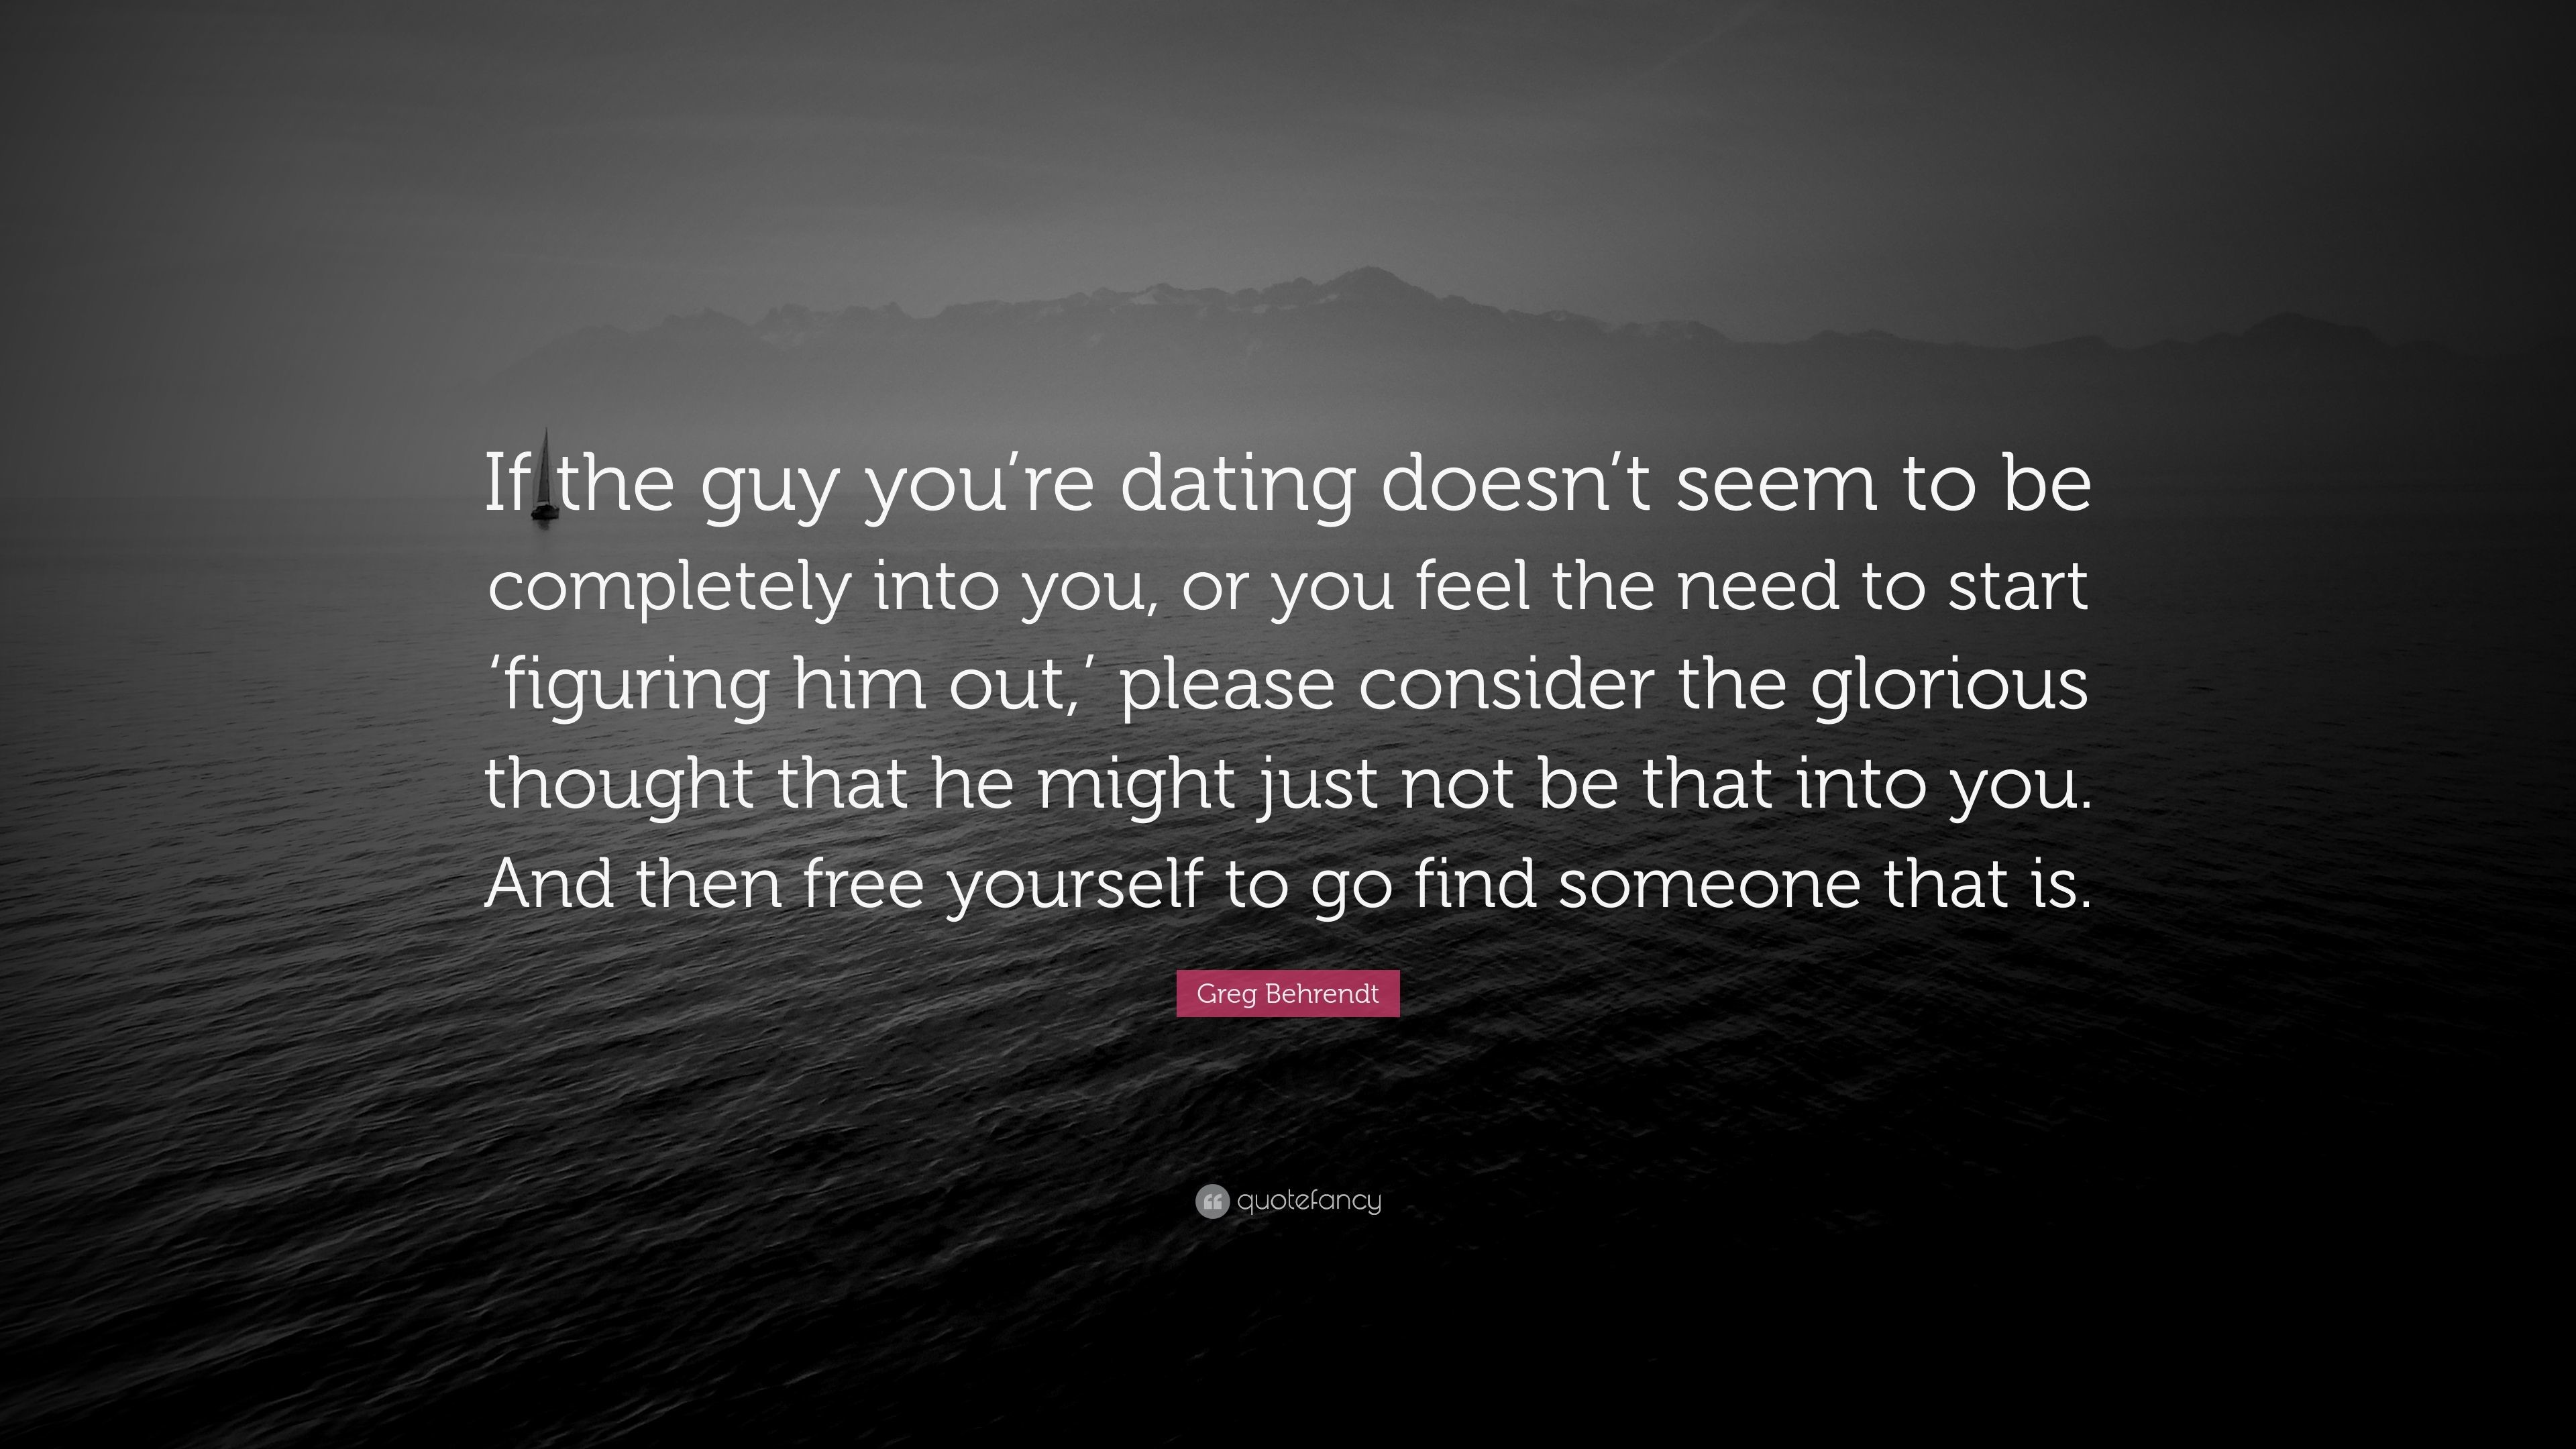 3840x2160 Greg Behrendt Quote: “If the guy you're dating doesn't seem